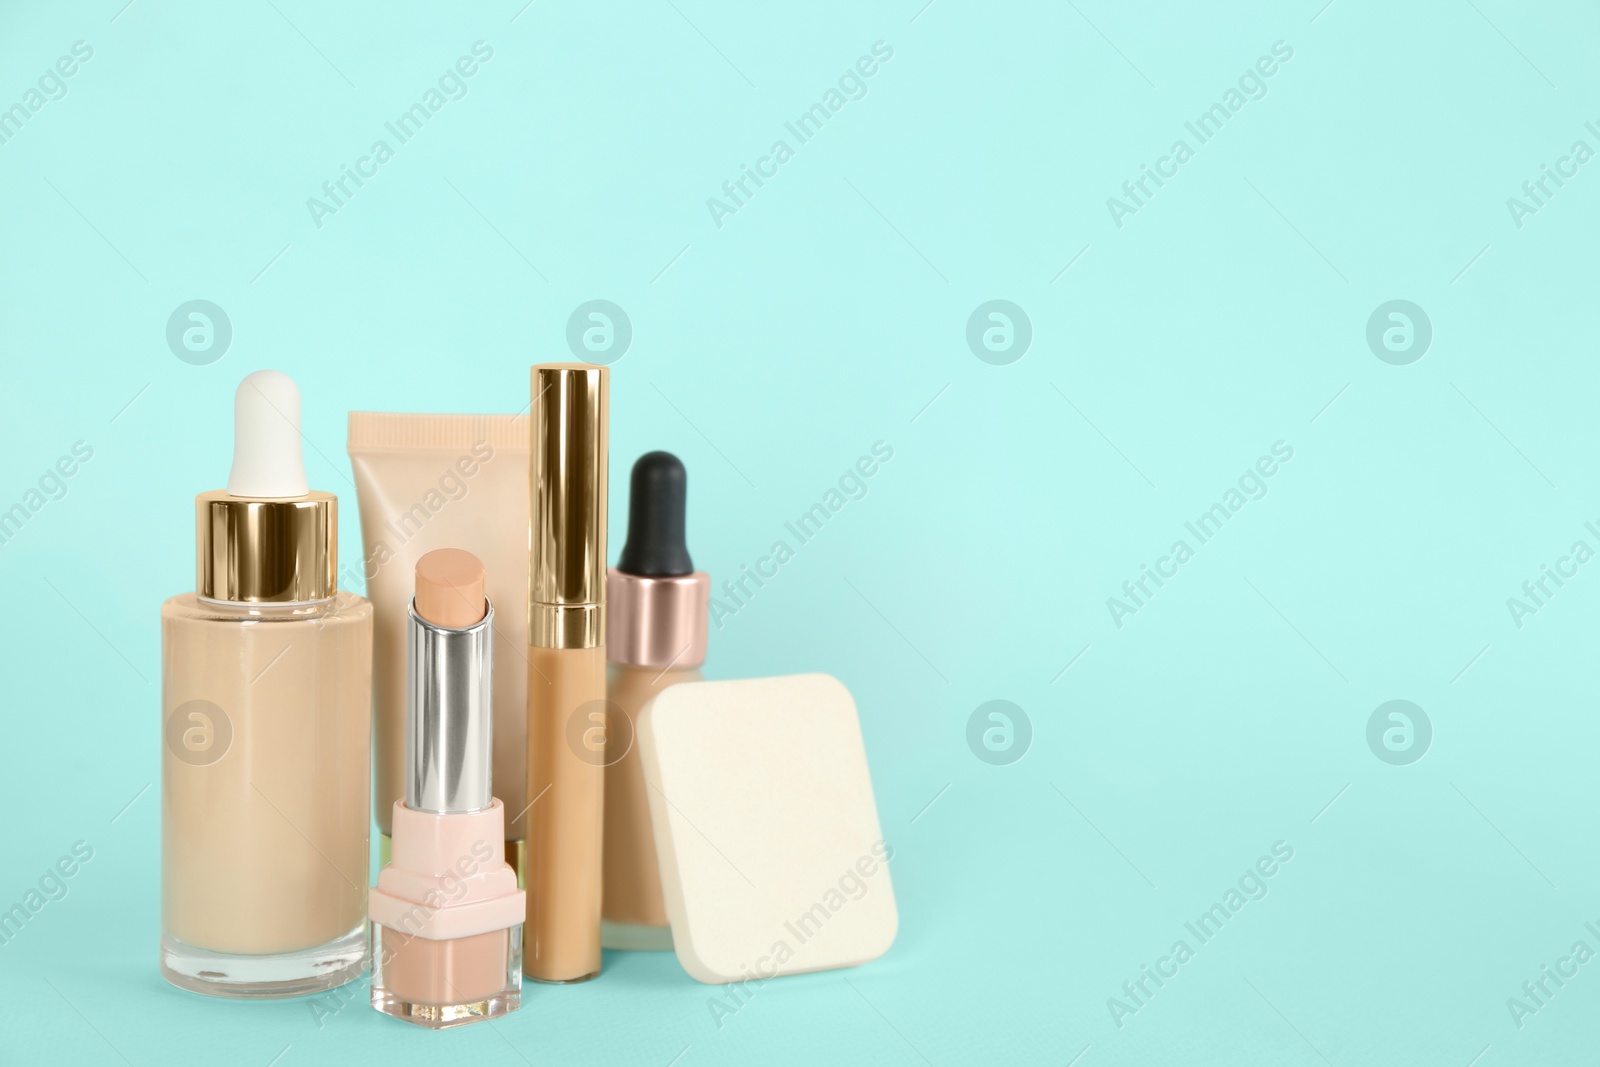 Photo of Foundation makeup products on turquoise background, space for text. Decorative cosmetics